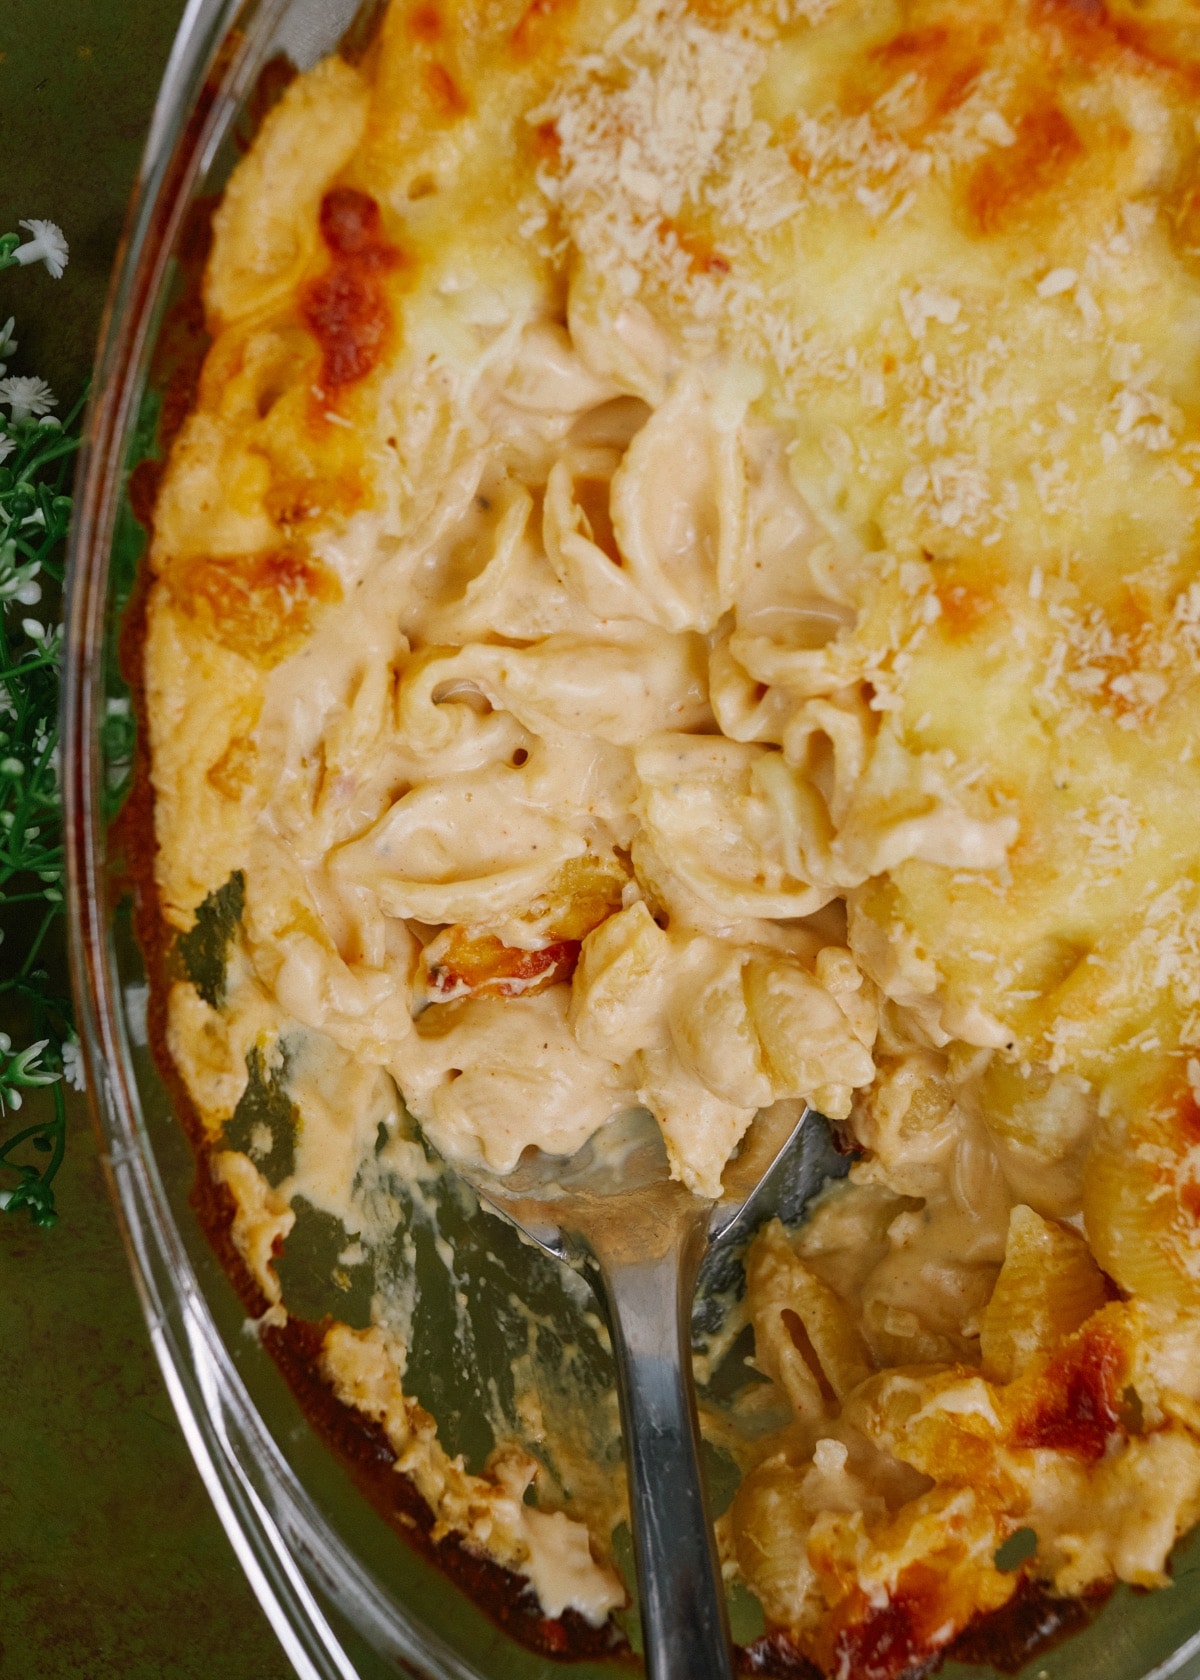 four cheese pasta casserole in a baking dish with a spoon lifting out a serving